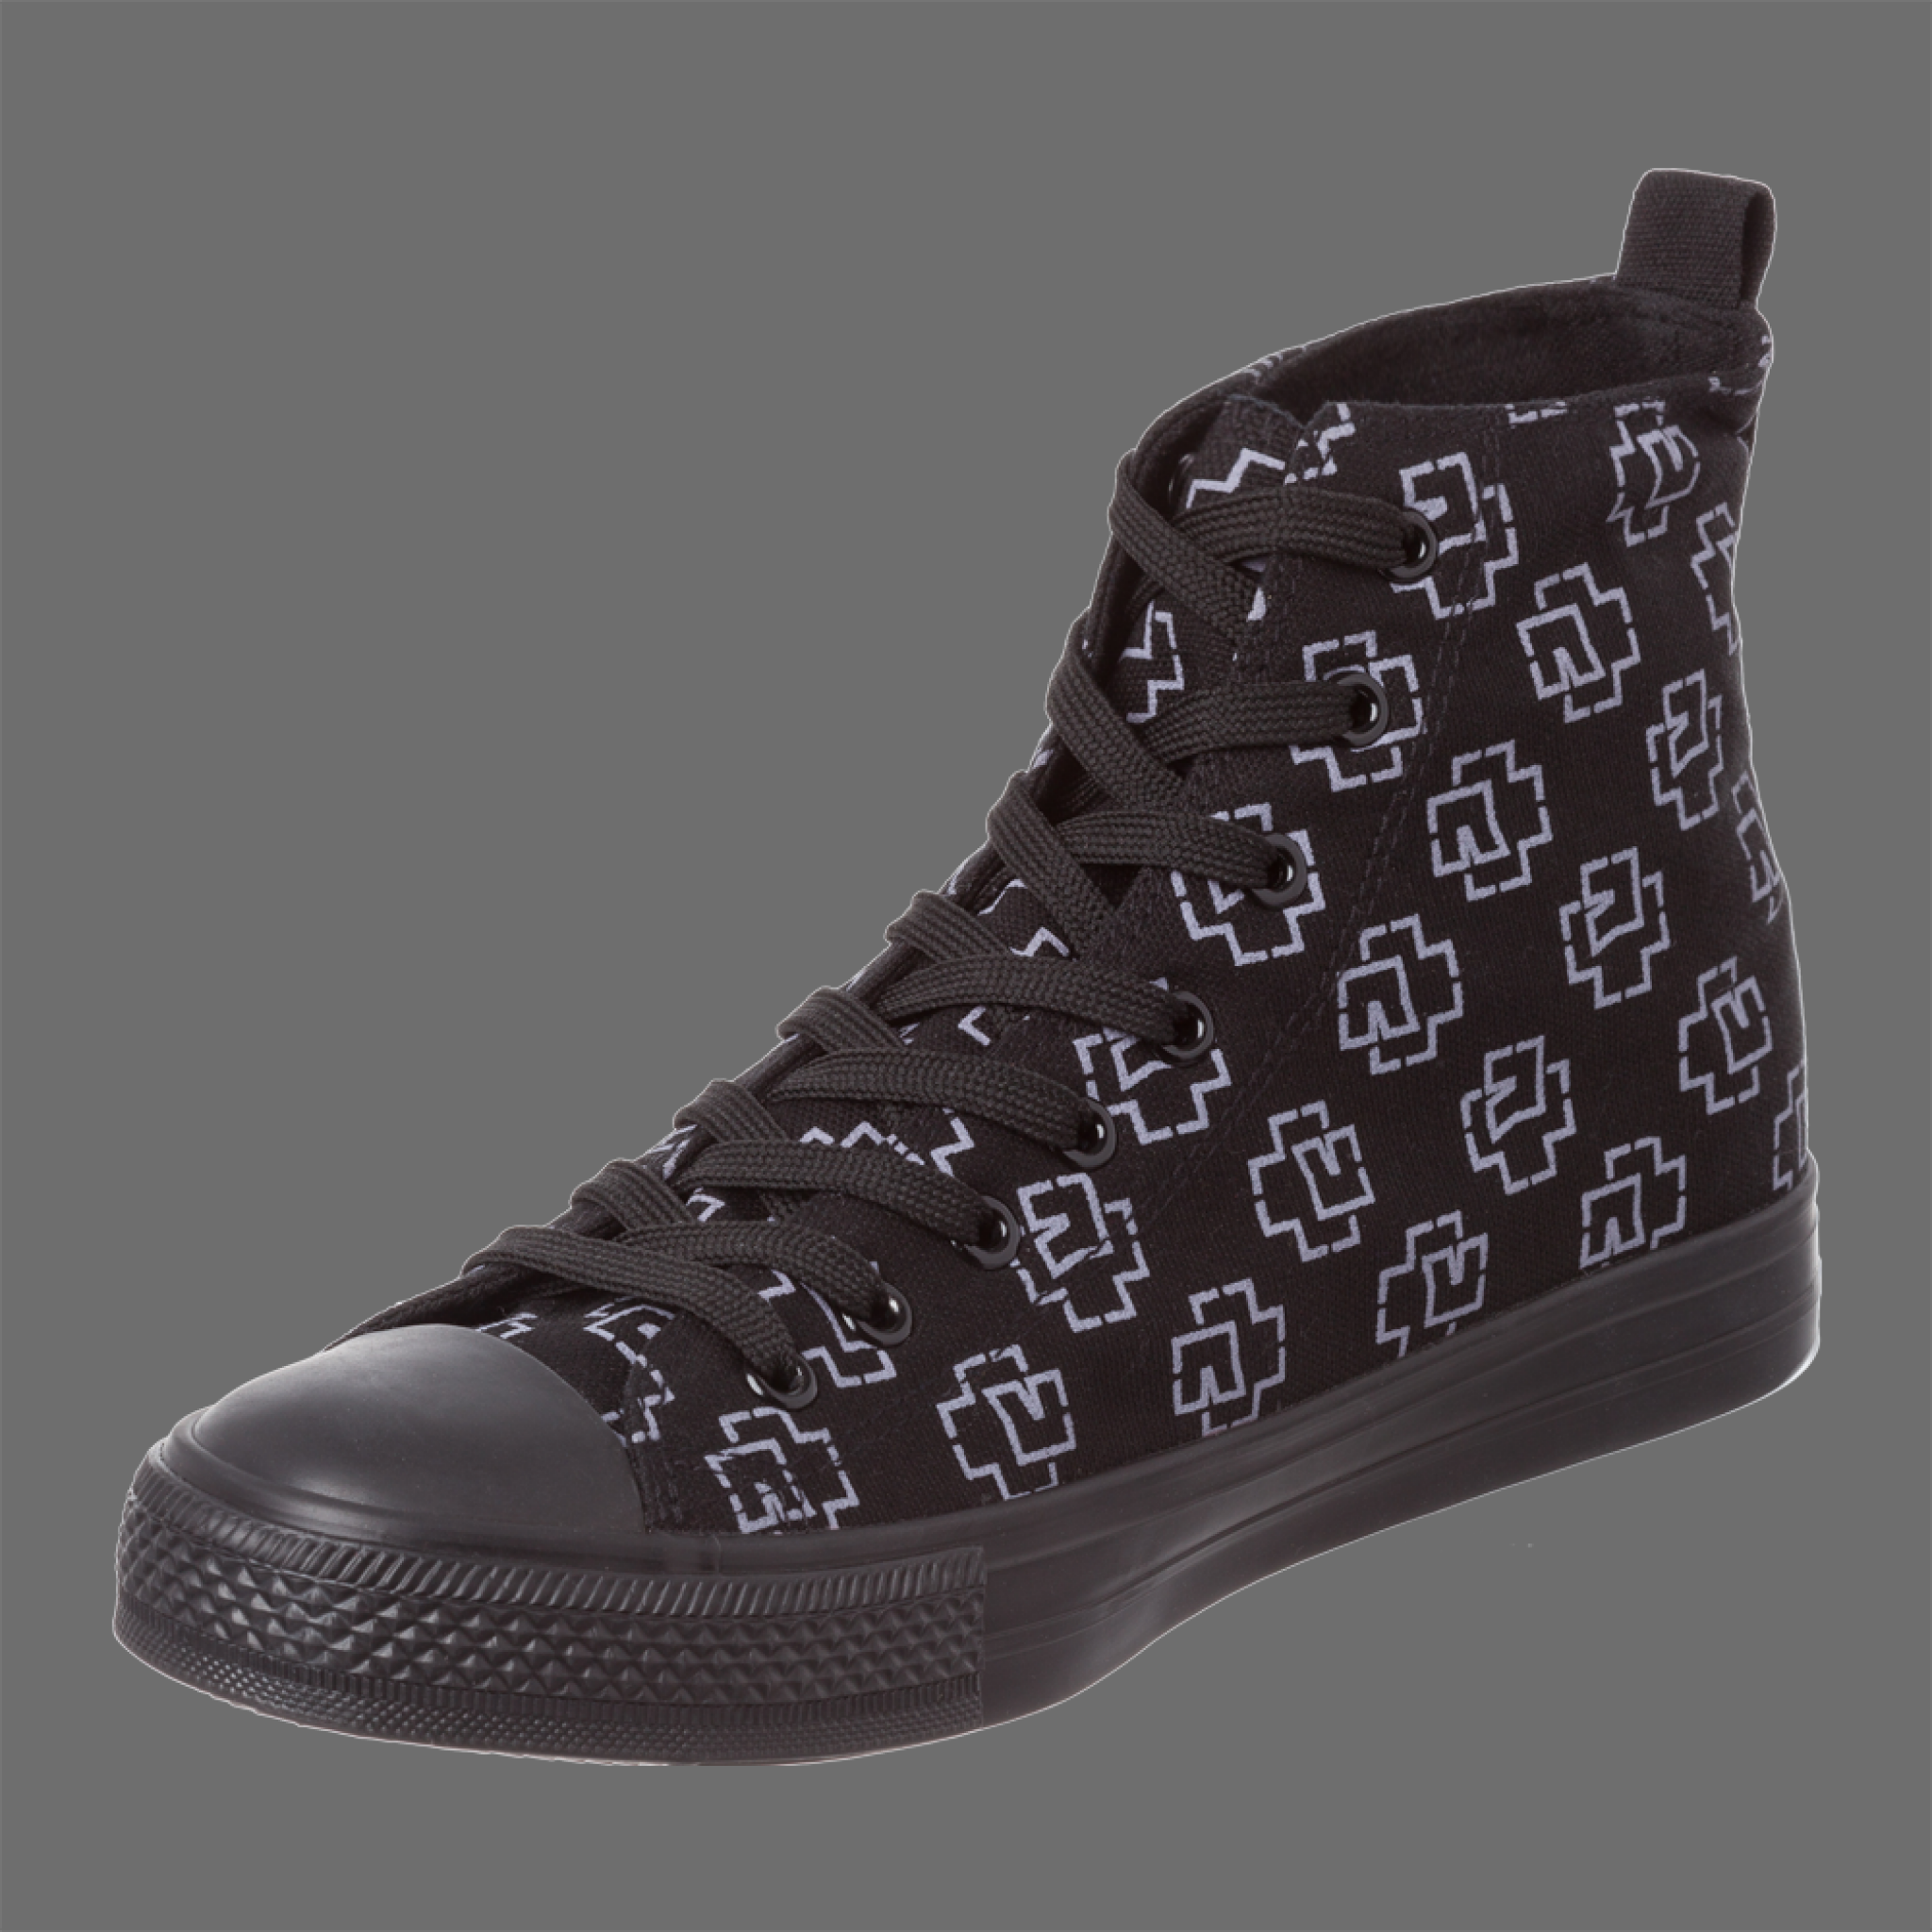 rammstein tiger shoes